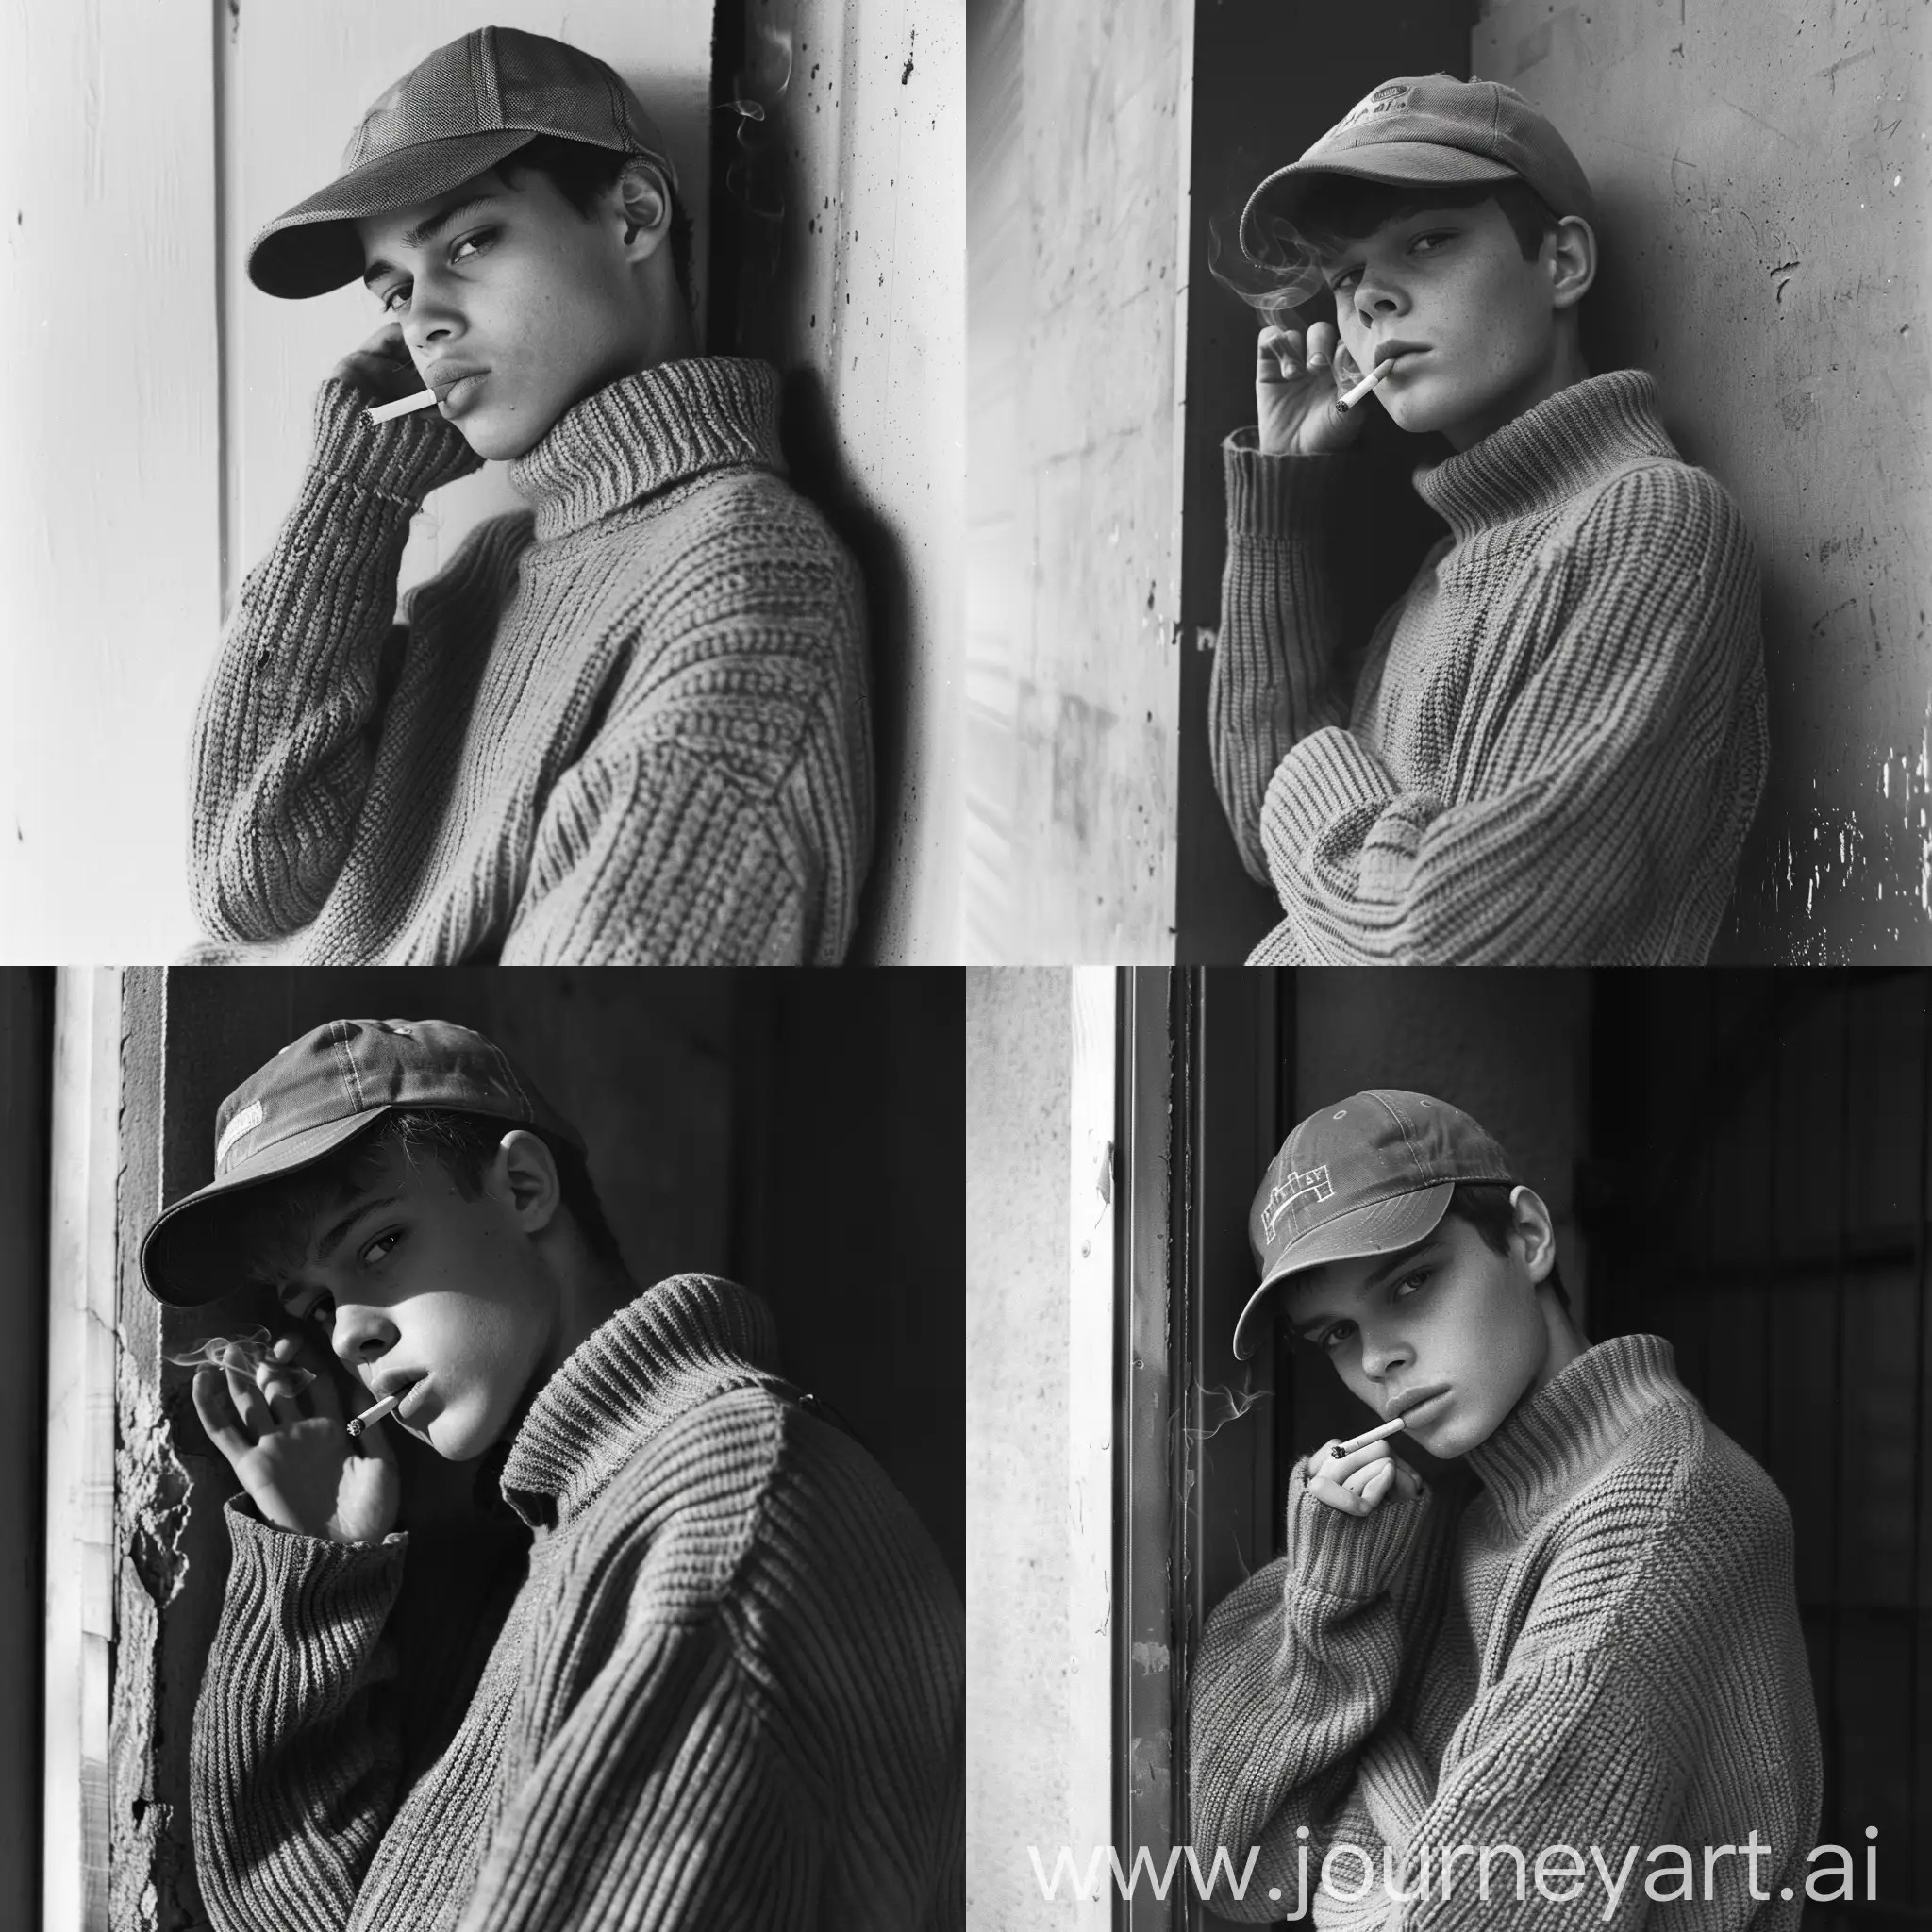 Young-Man-in-Baseball-Cap-Smoking-Cigarette-Against-Wall